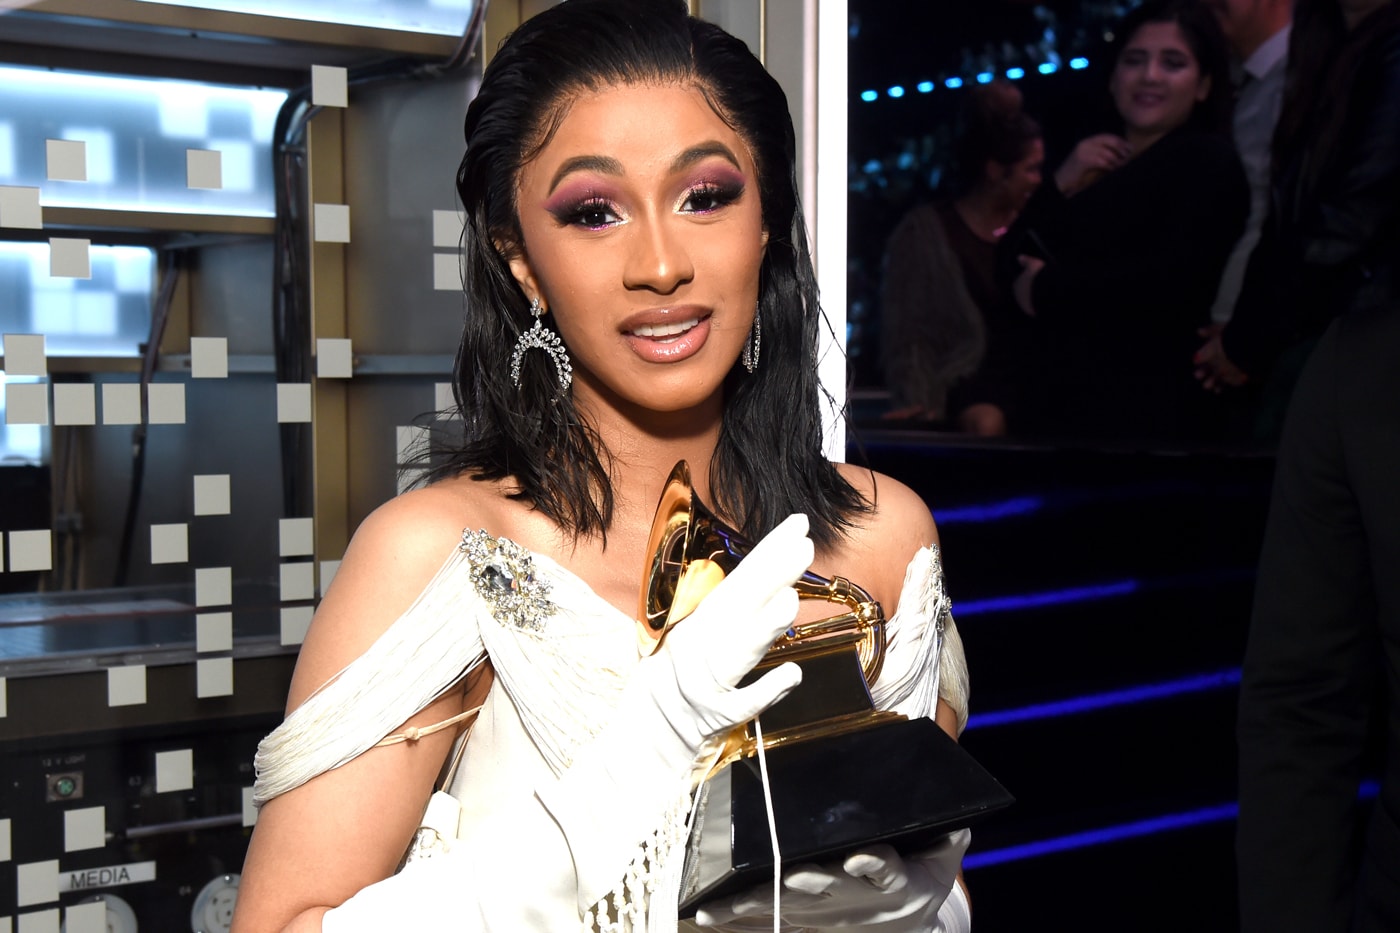 Cardi B and Offset All Over Each Other at the 2019 Grammys - PAPER Magazine